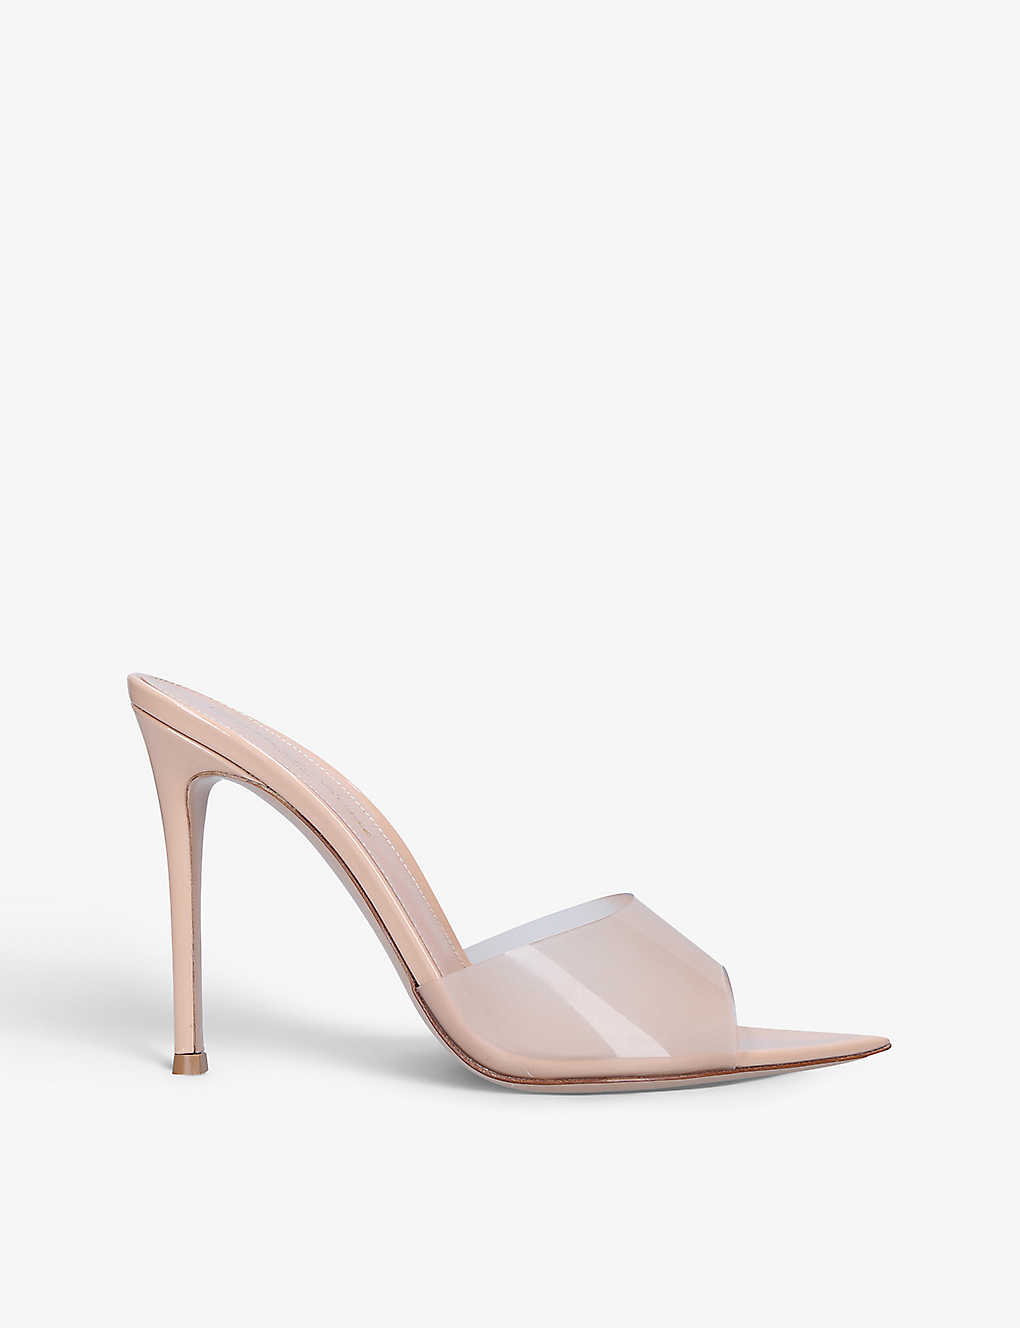 Shop Gianvito Rossi Women's Blush Elle Leather And Pvc Heeled Mules